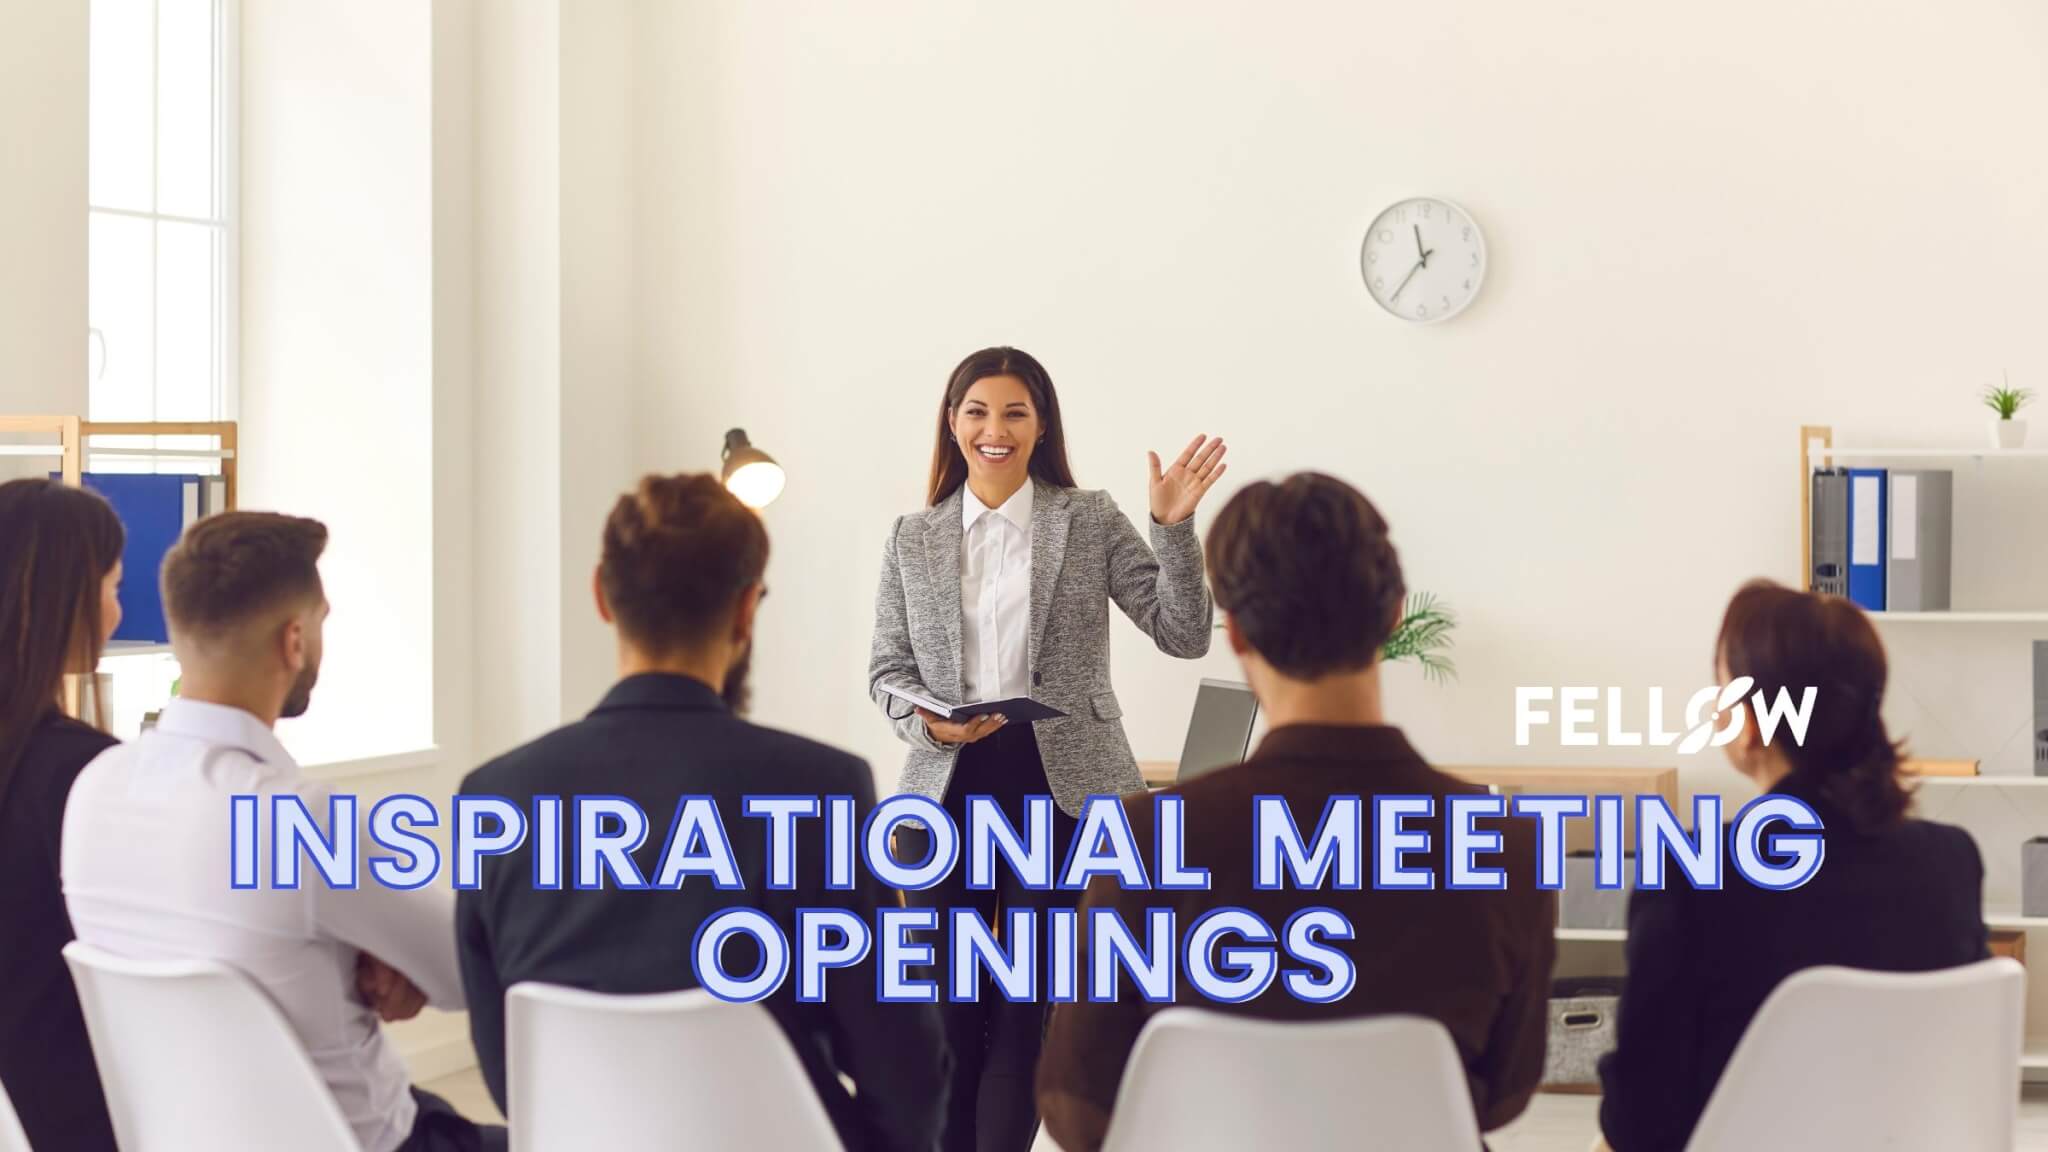 11 Inspirational Meeting Openings to Engage Your Team